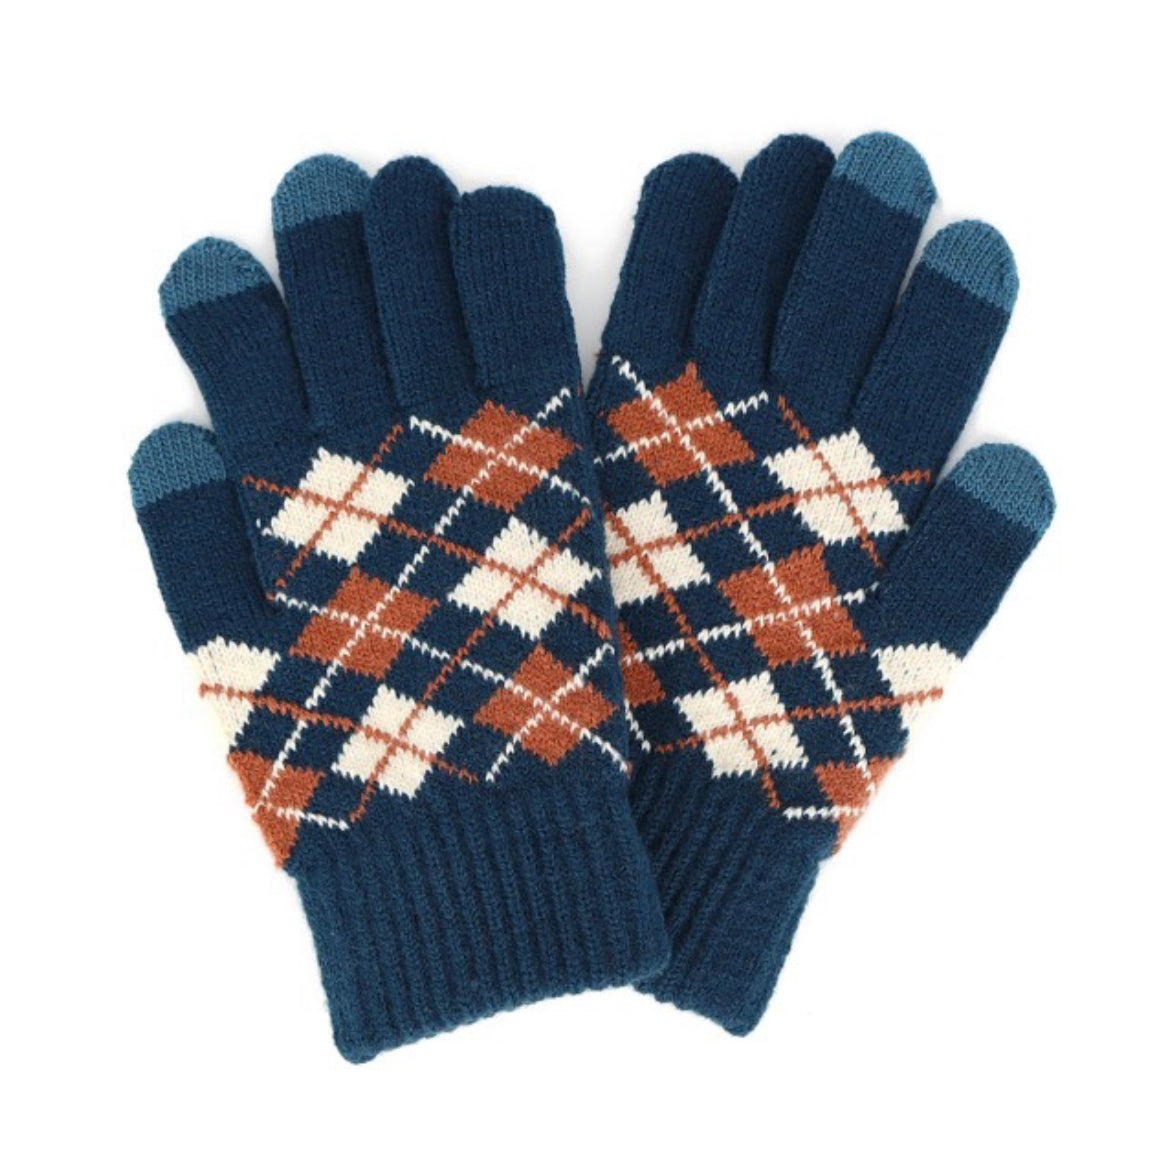 Teal Plaid Knit Gloves With Touch Screen Compatibility